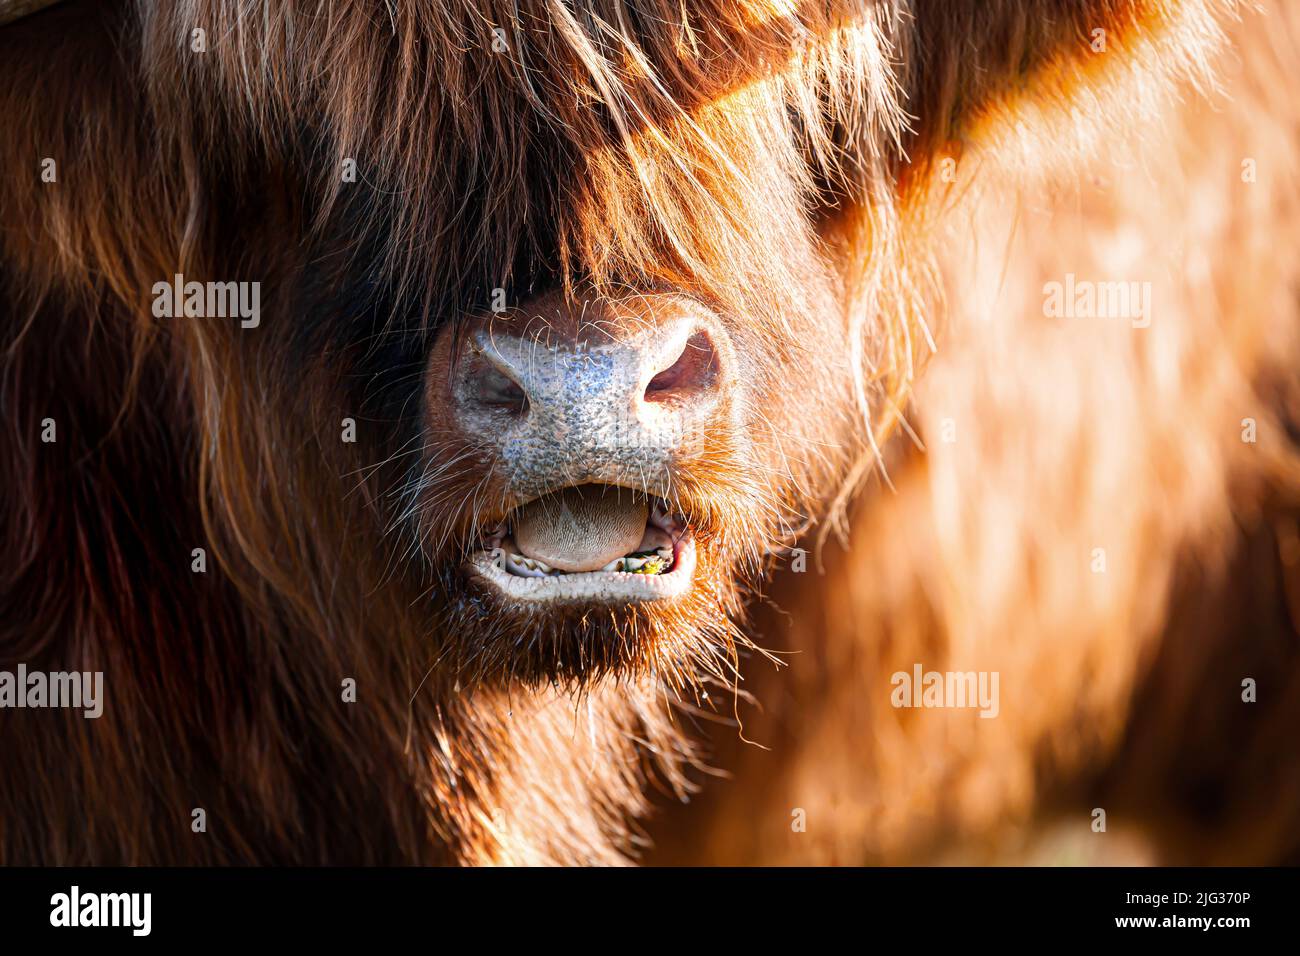 Highland cow bull face close up with mouth open showing teeth and tongue Stock Photo